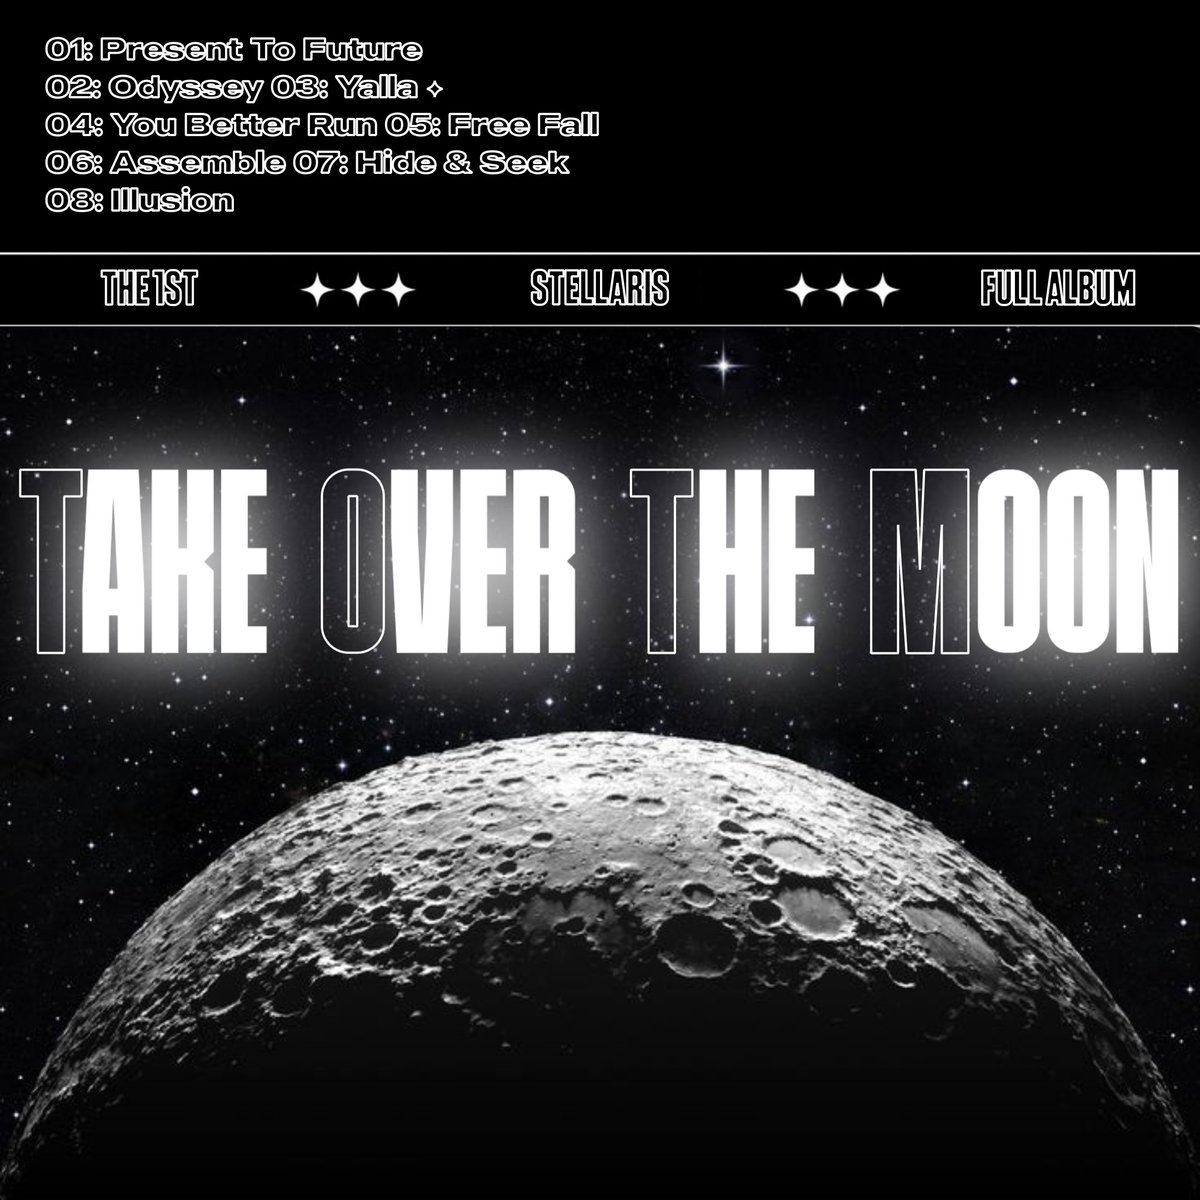 > 𝗜𝗠𝗣𝗢𝗥𝗧𝗔𝗡𝗧 𝗔𝗡𝗡𝗢𝗨𝗡𝗖𝗘𝗠𝗘𝗡𝗧 <

We are thrilled to announce the full album release of 'Take Over The Moon' by 1st Full Album 

The album will be available on May 15, 2024, 
Thank you for your continued support.

#STELLARIS #스텔라리스 
#TakeOverTheMoon